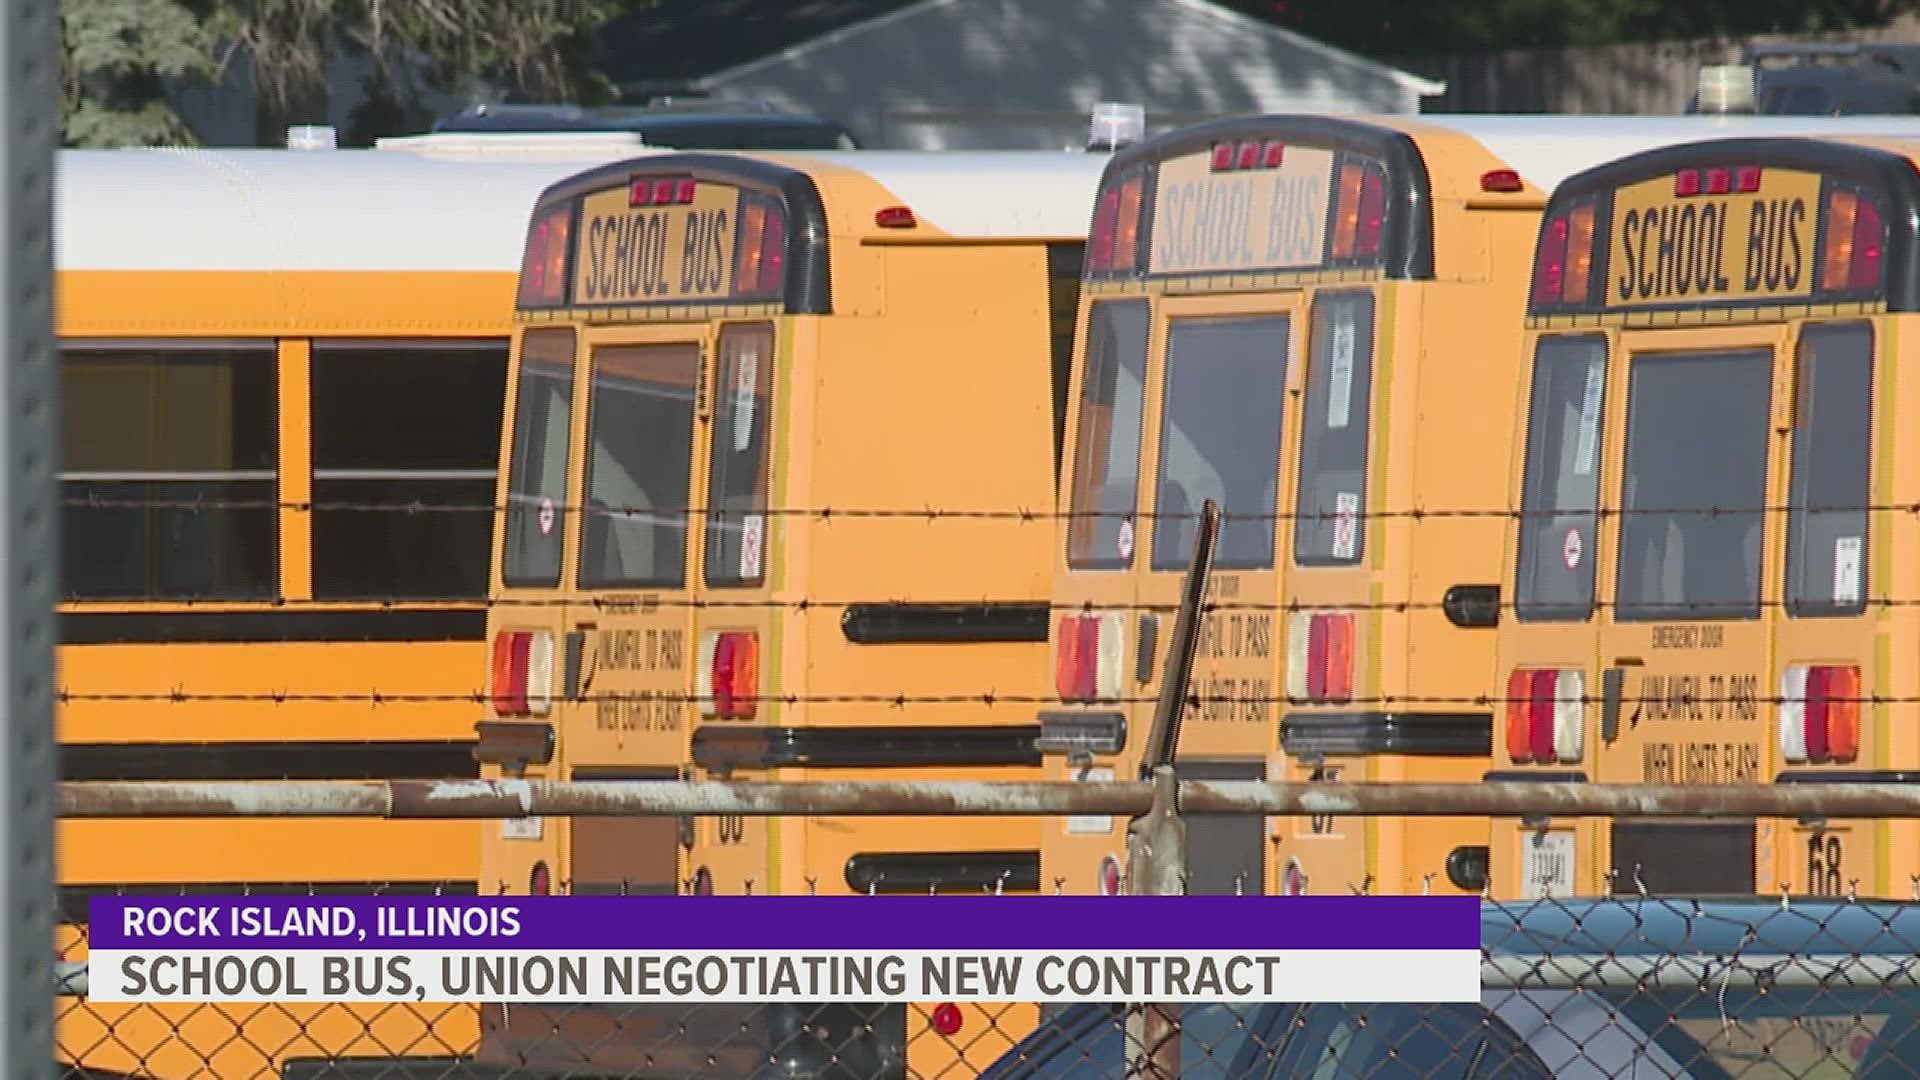 Durham School Services and Teamsters Local 371 are negotiating a new contract for members to vote on Friday at 5:30 p.m.